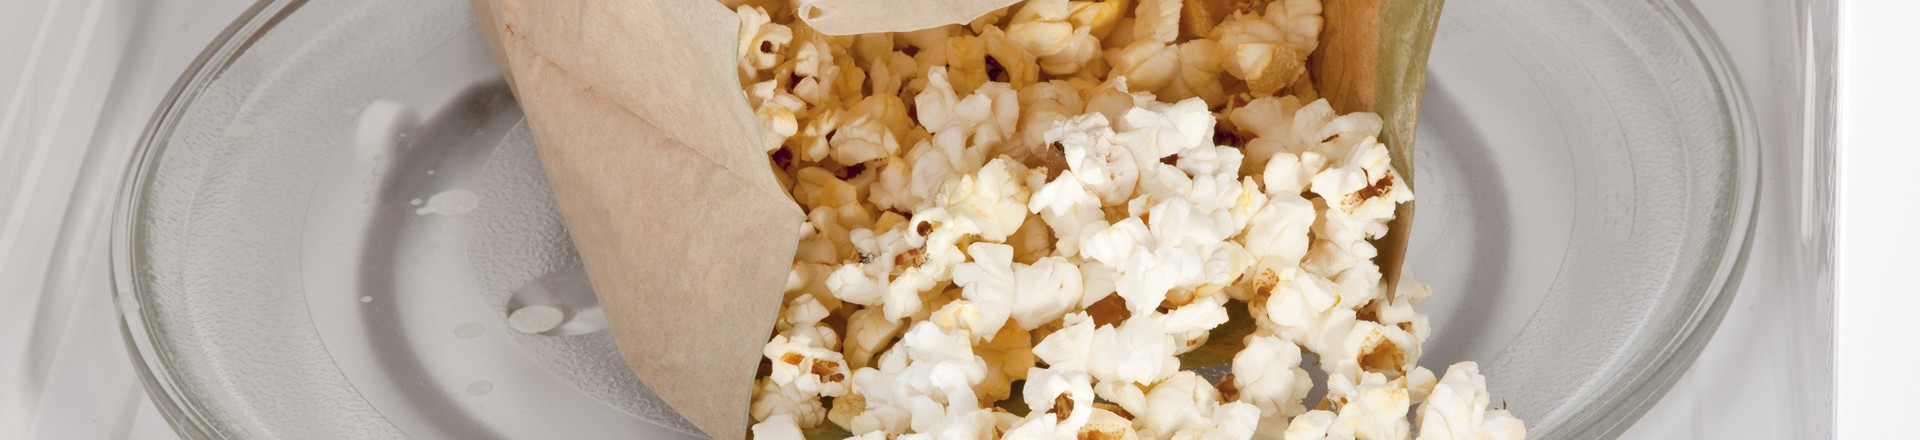 microwave popcorn is one of the worst foods to eat